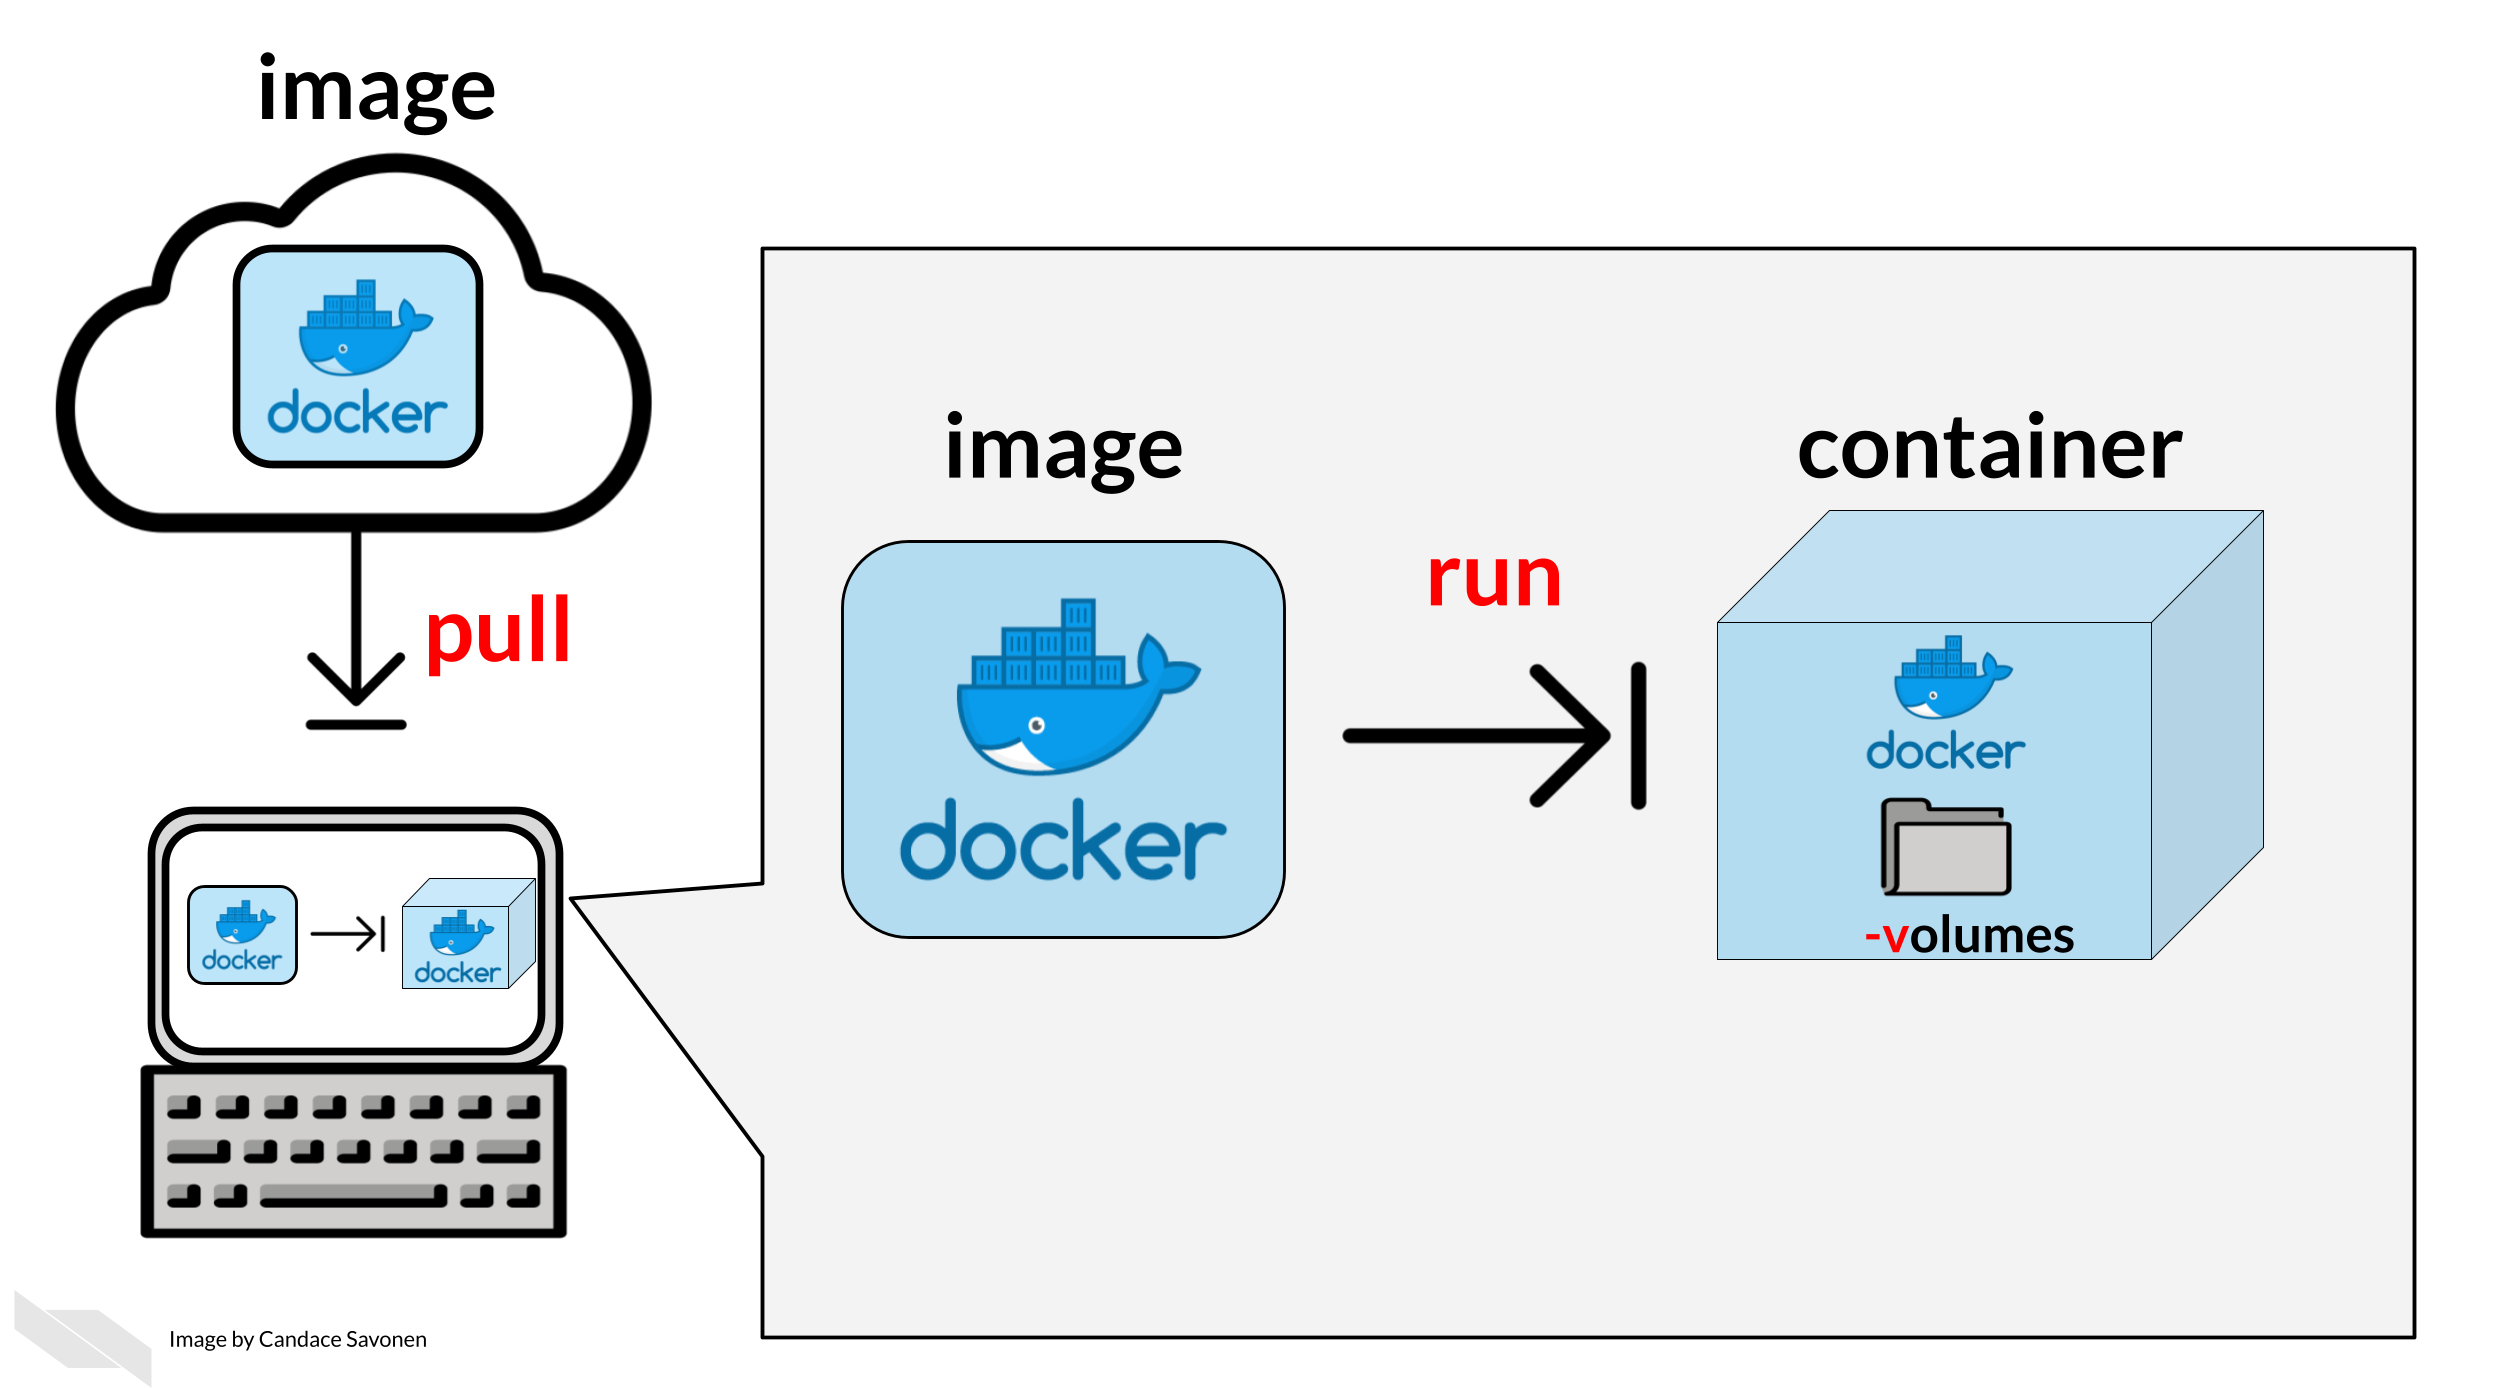 First we need to get the Docker image. A Docker image is like a snapshot of your computing environment that you can move from place to place. We can download images from online and then use them to make a container. Containers are what we use to actually run analyses.